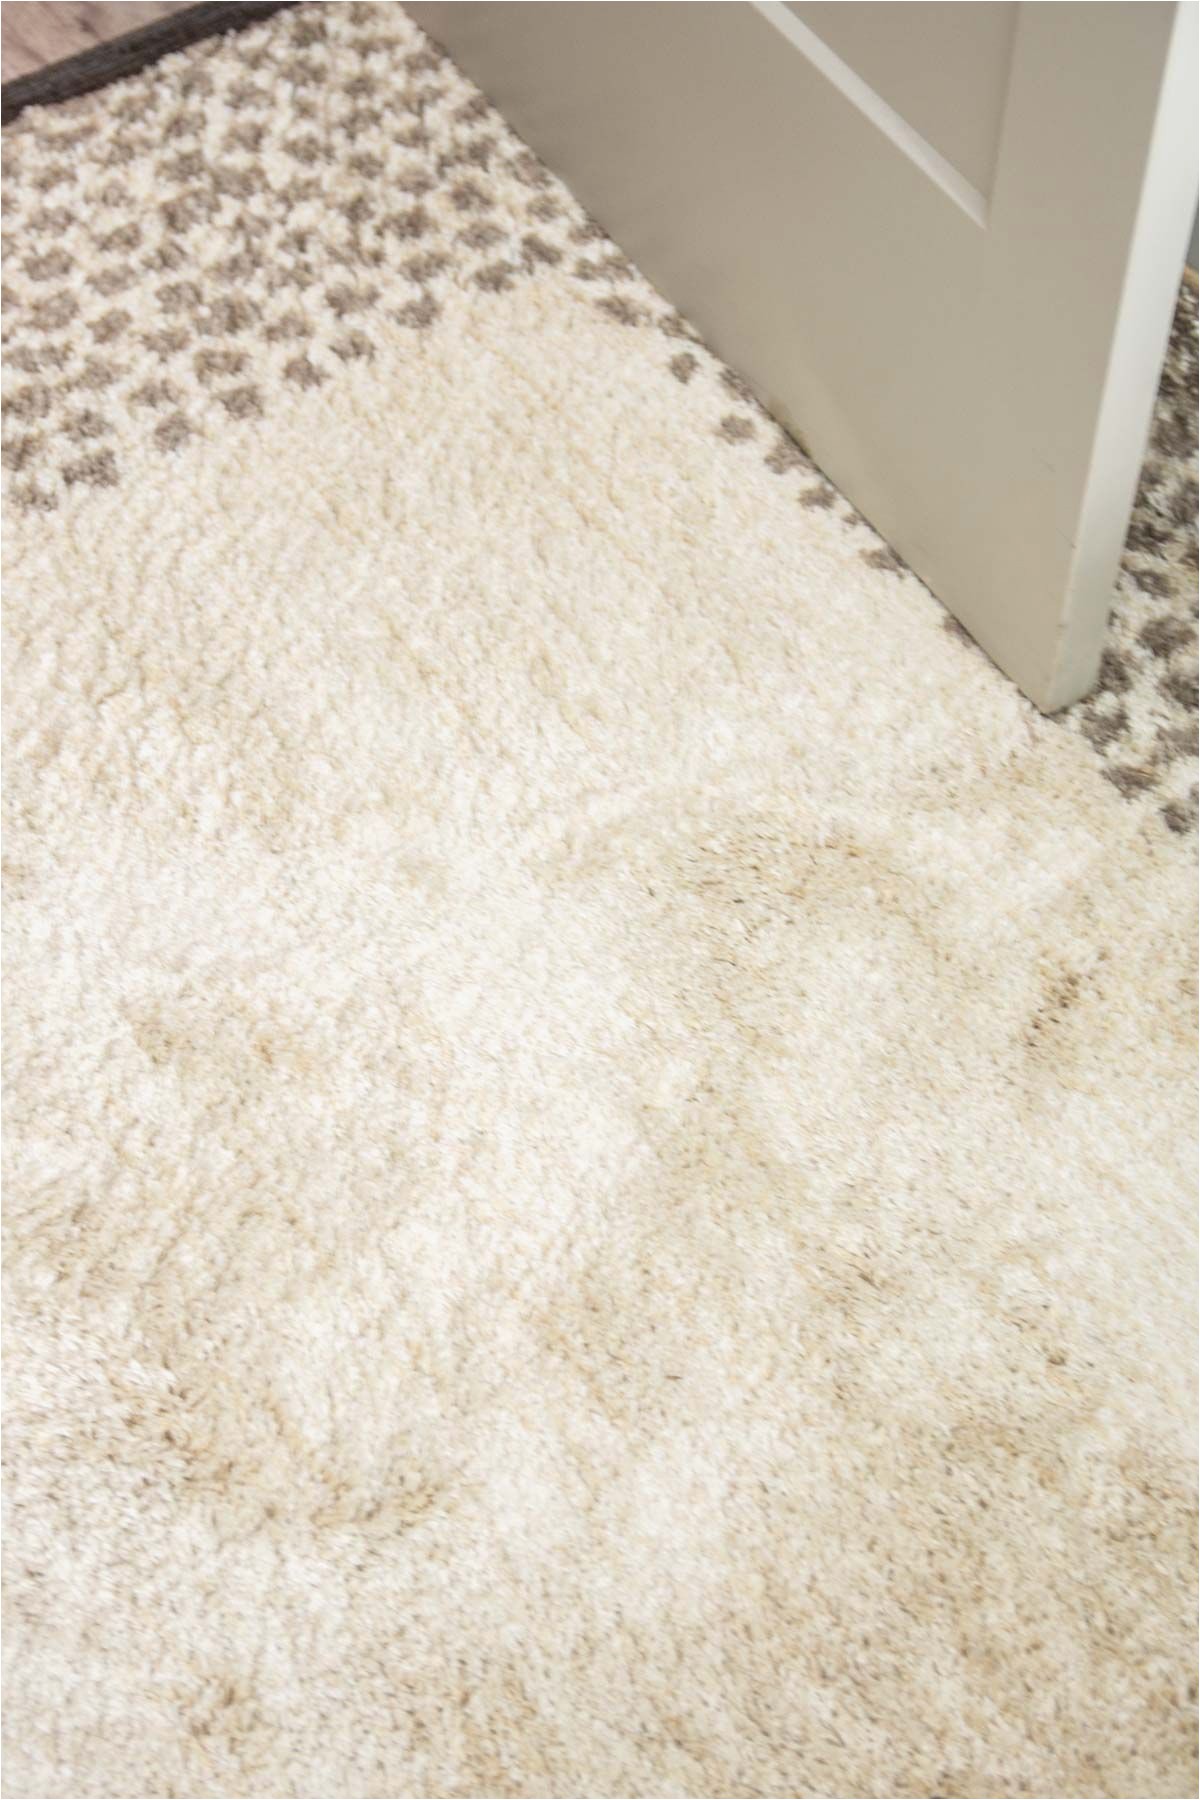 Area Rugs for College Dorms Cornell Apartment area Rugs for Each Bedroom